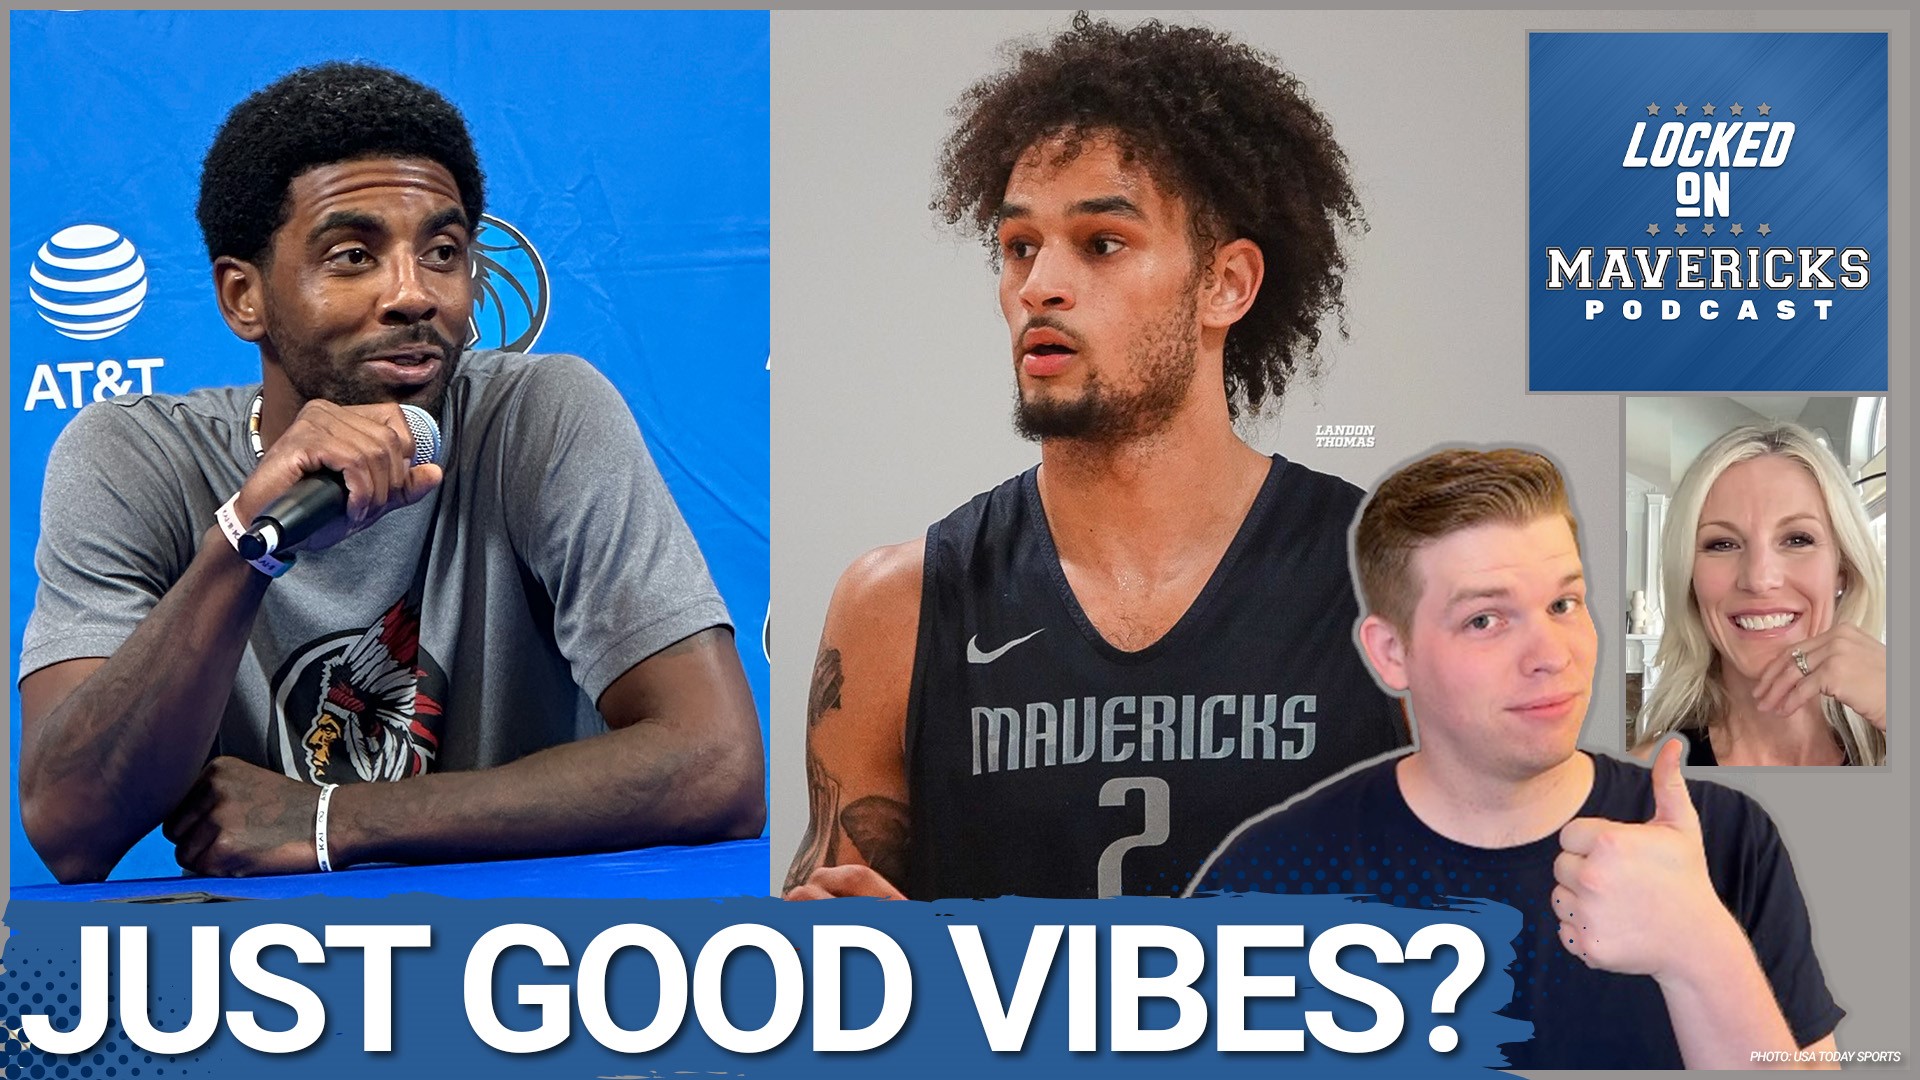 Nick Angstadt is joined by Dana Larson to discuss Jason Kidd's comments on the Mavs' Rookies and Kyrie Irving's good vibes at Dallas Mavericks Training Camp.